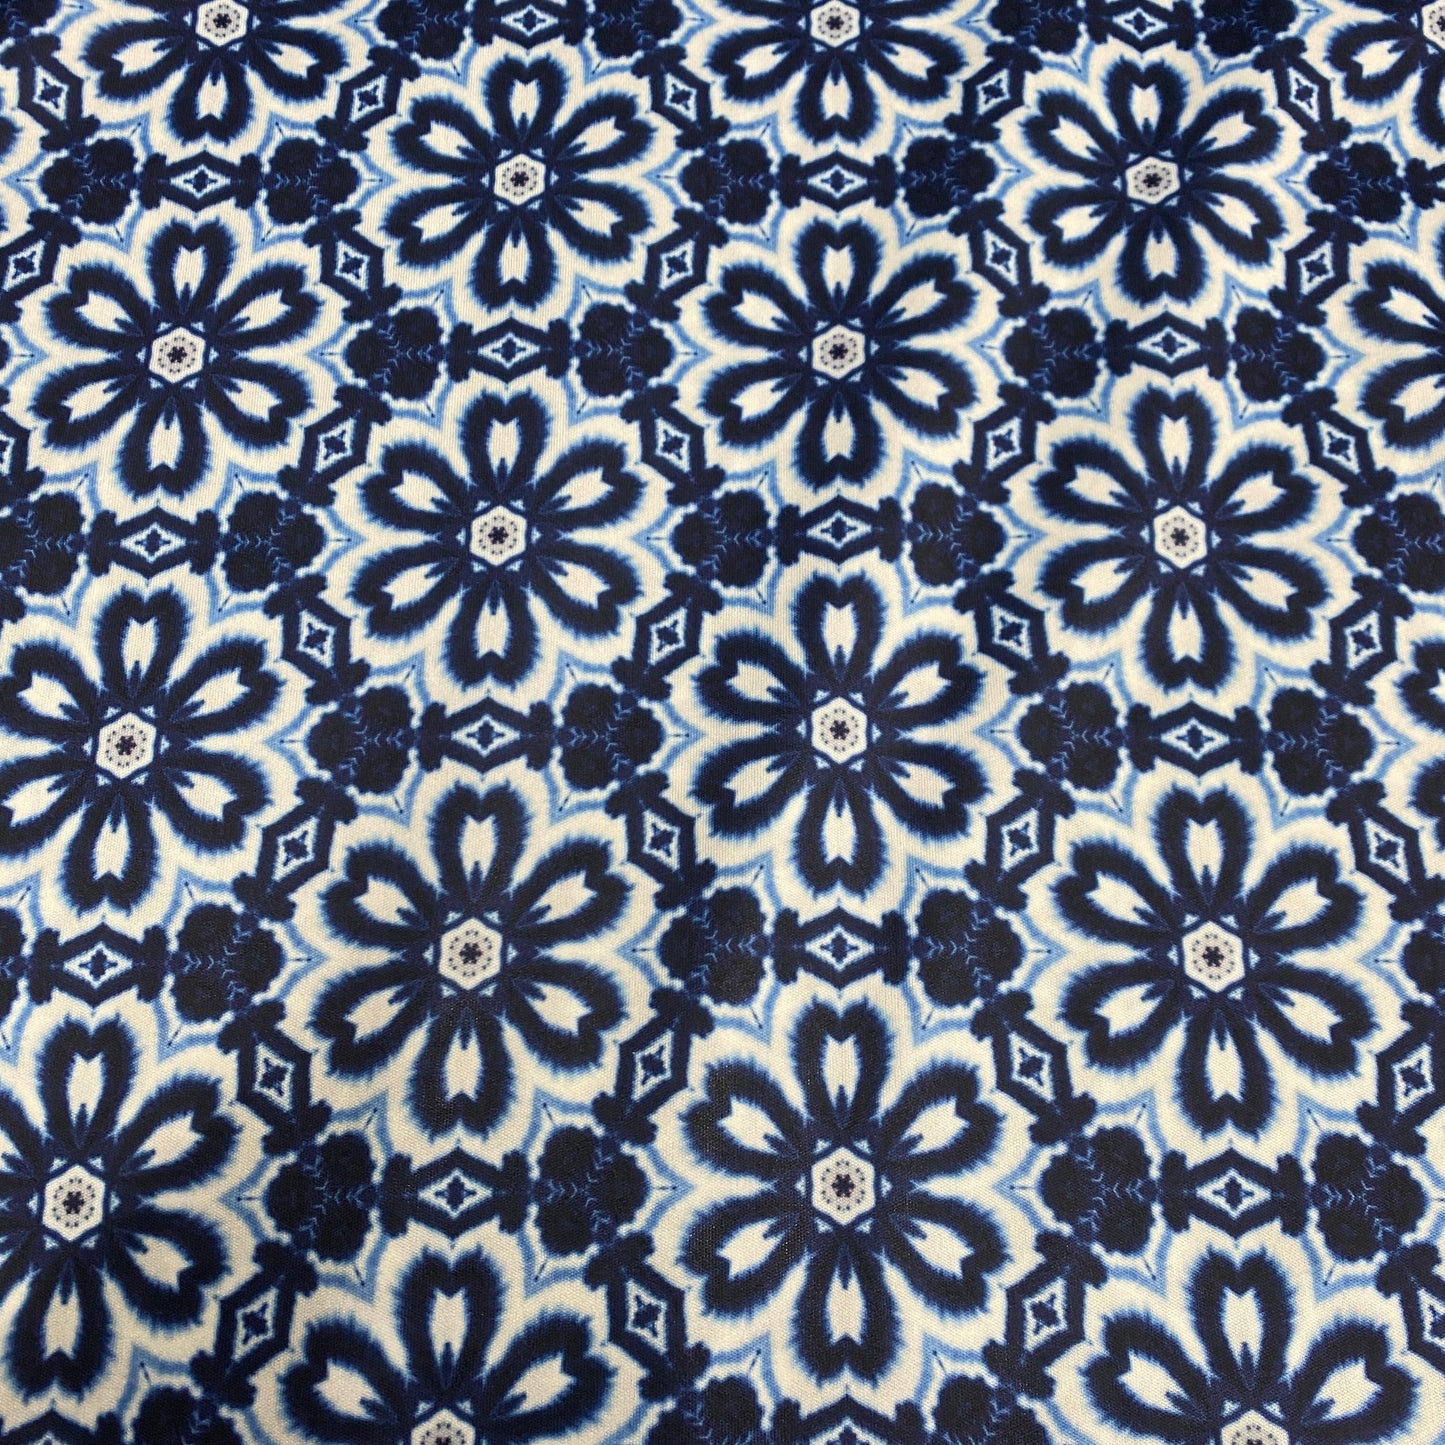 Blue Floral Batik 1 mil PUL Fabric - Made in the USA - Nature's Fabrics